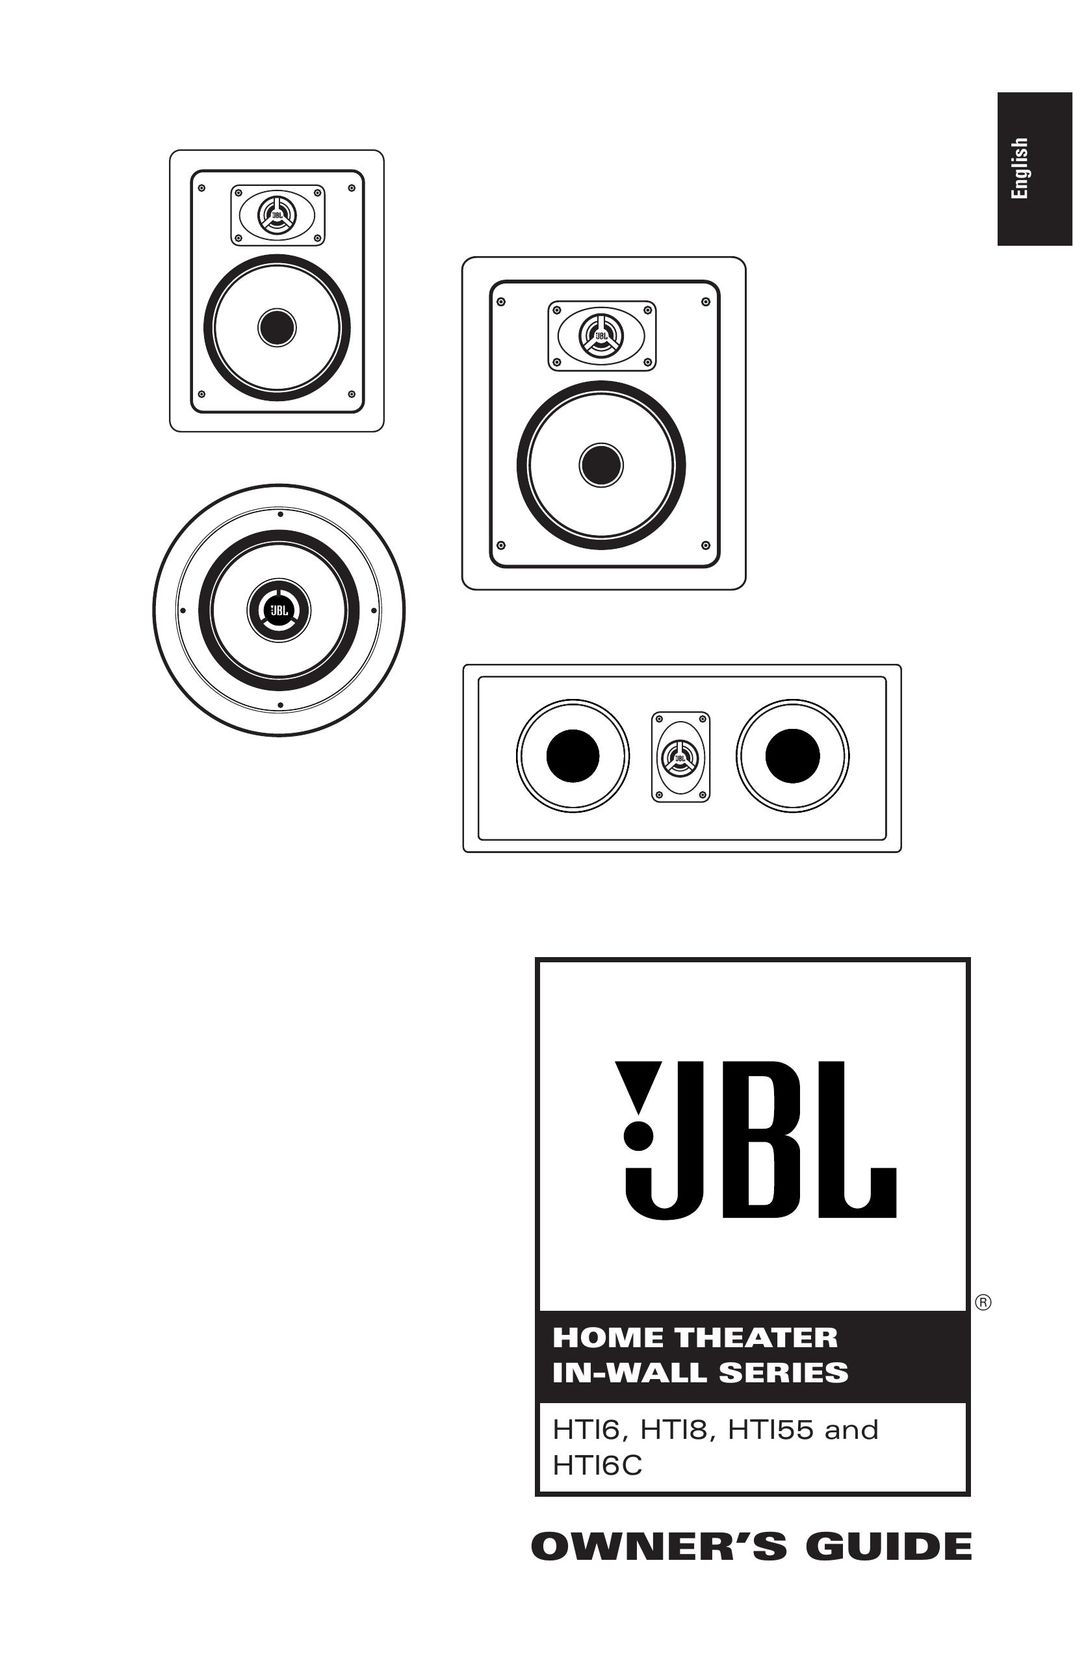 JBL HT16 Home Theater System User Manual